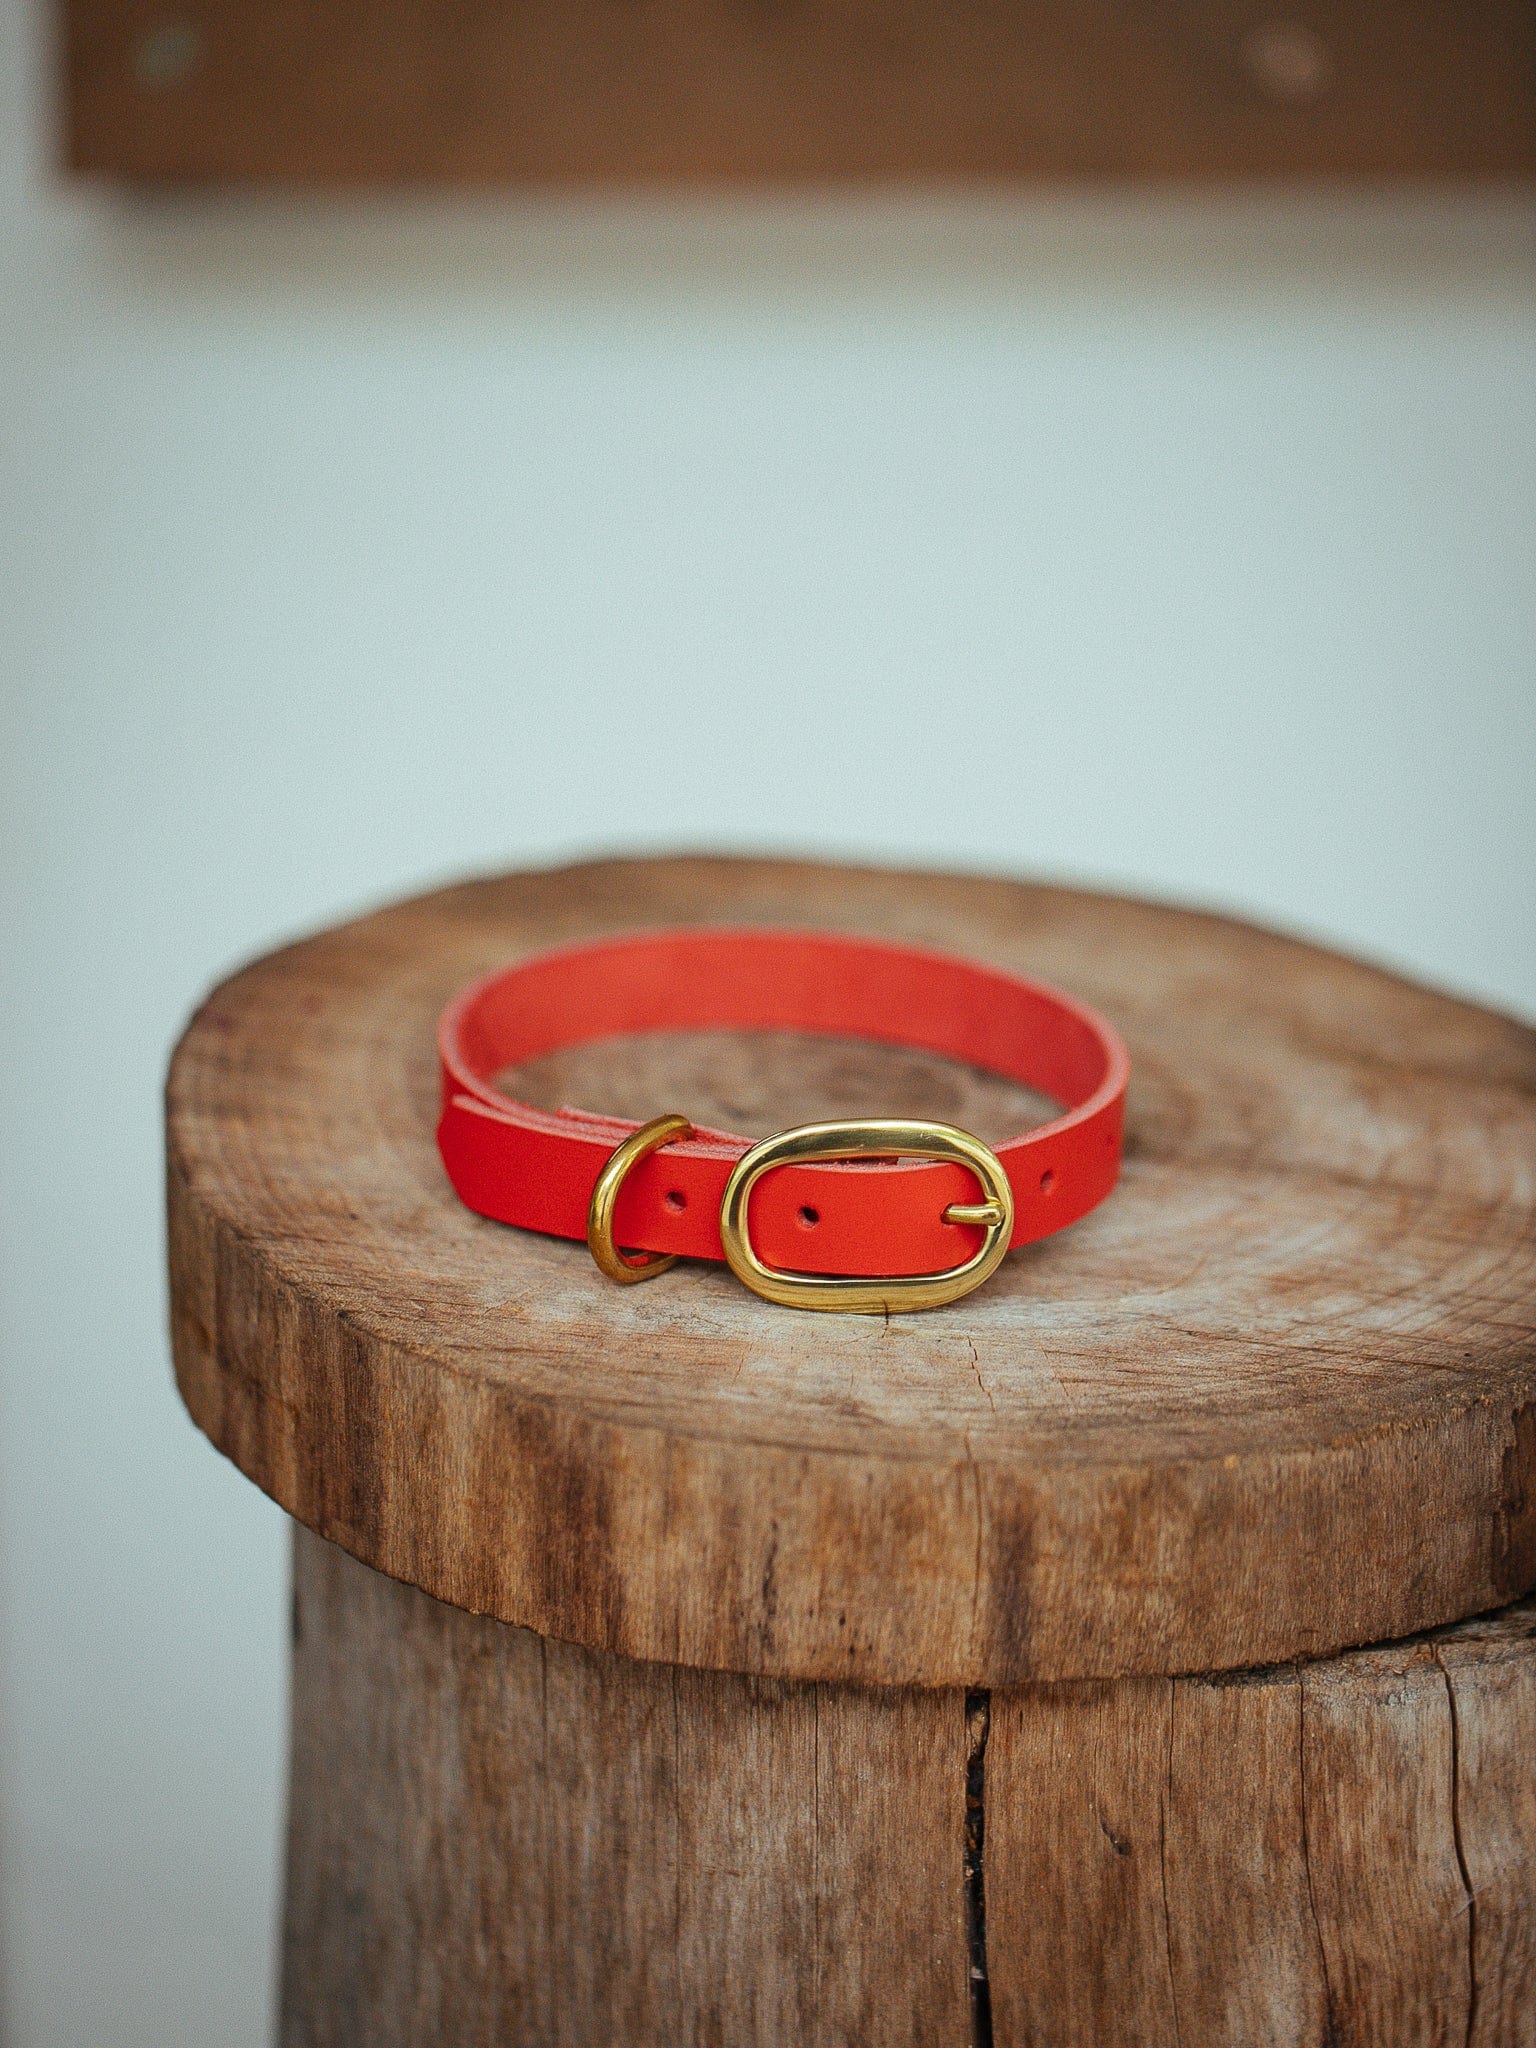 The Real McCaul Leathergoods Collar Classic Dog Collar - 15mm - Red Australian Made Australian Owned Leather Dog Collar with Brass Fittings- Australian Made